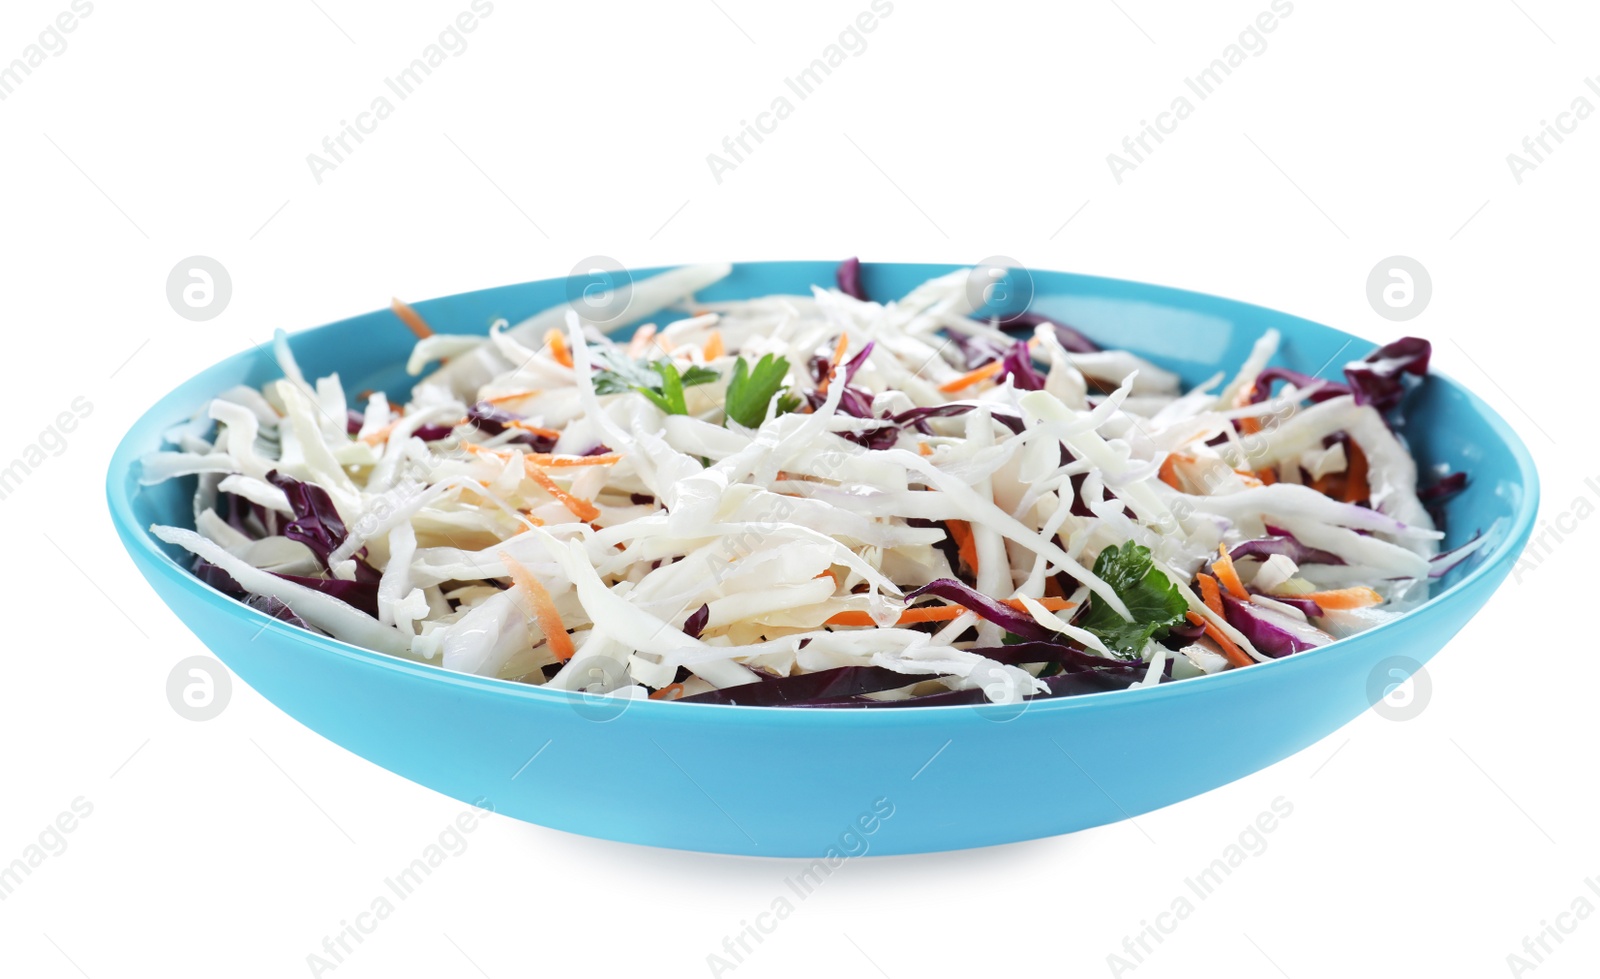 Photo of Plate of tasty cabbage salad isolated on white